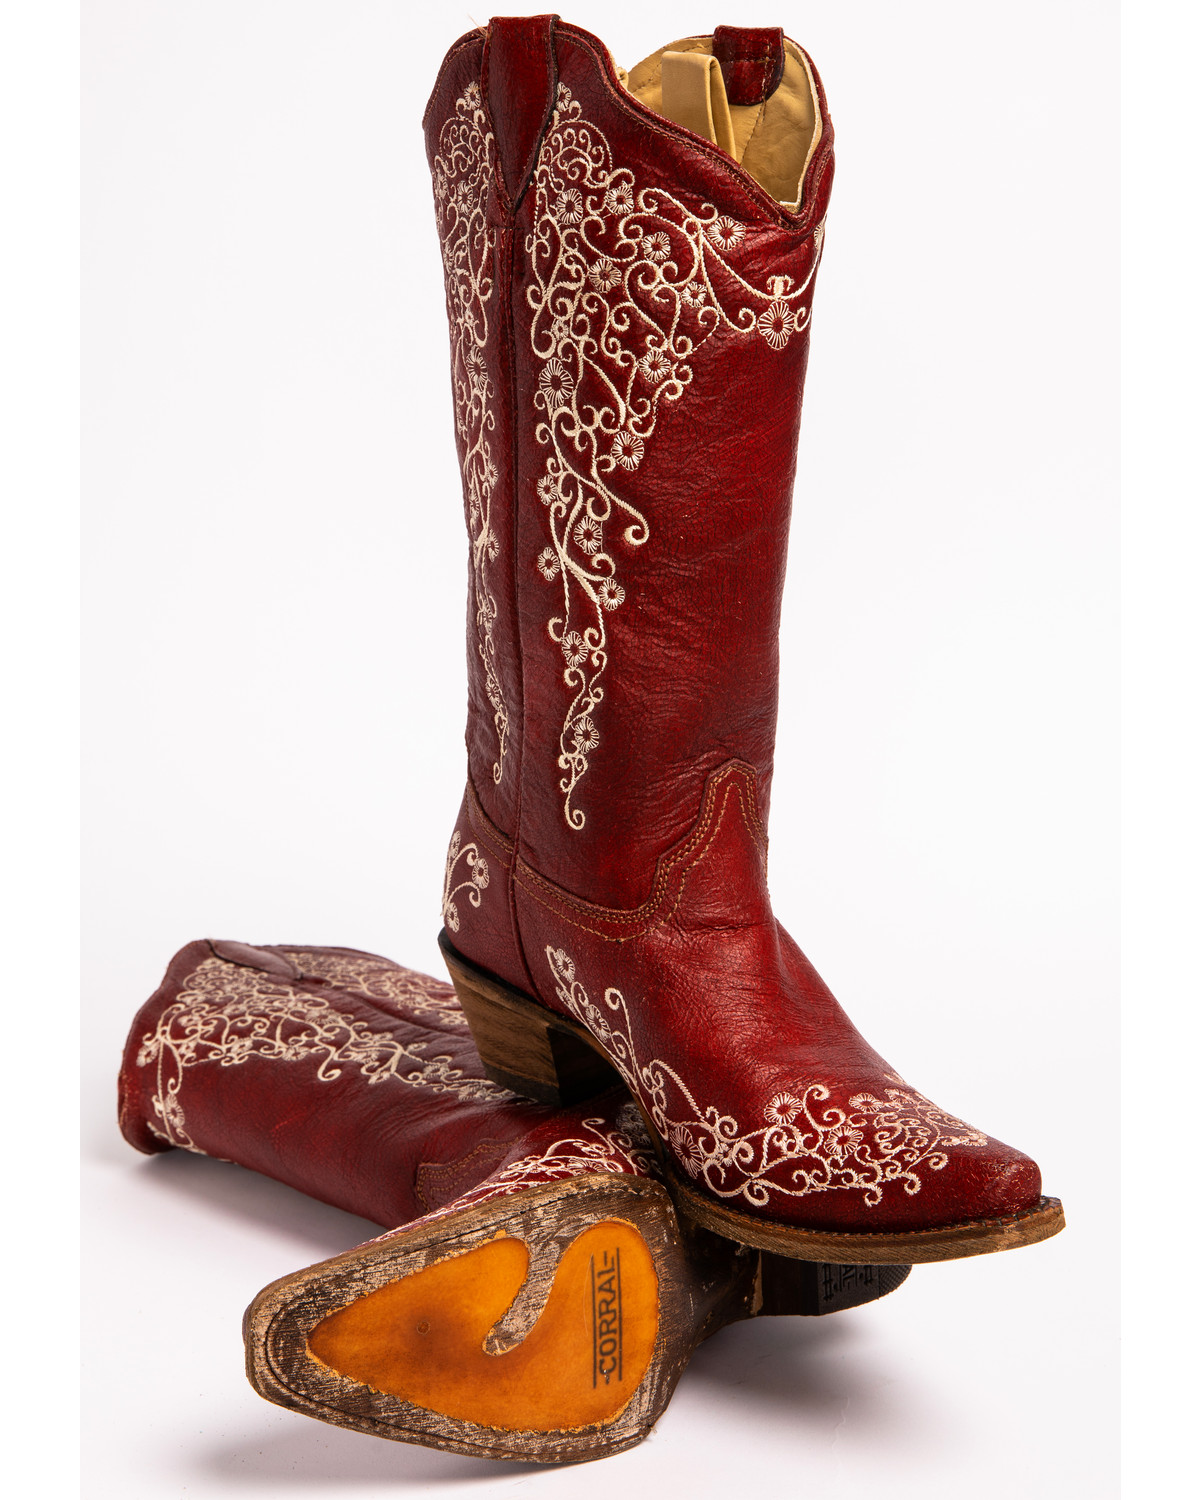 Corral Women's Red Embroidery Boots - Snip Toe - Country Outfitter